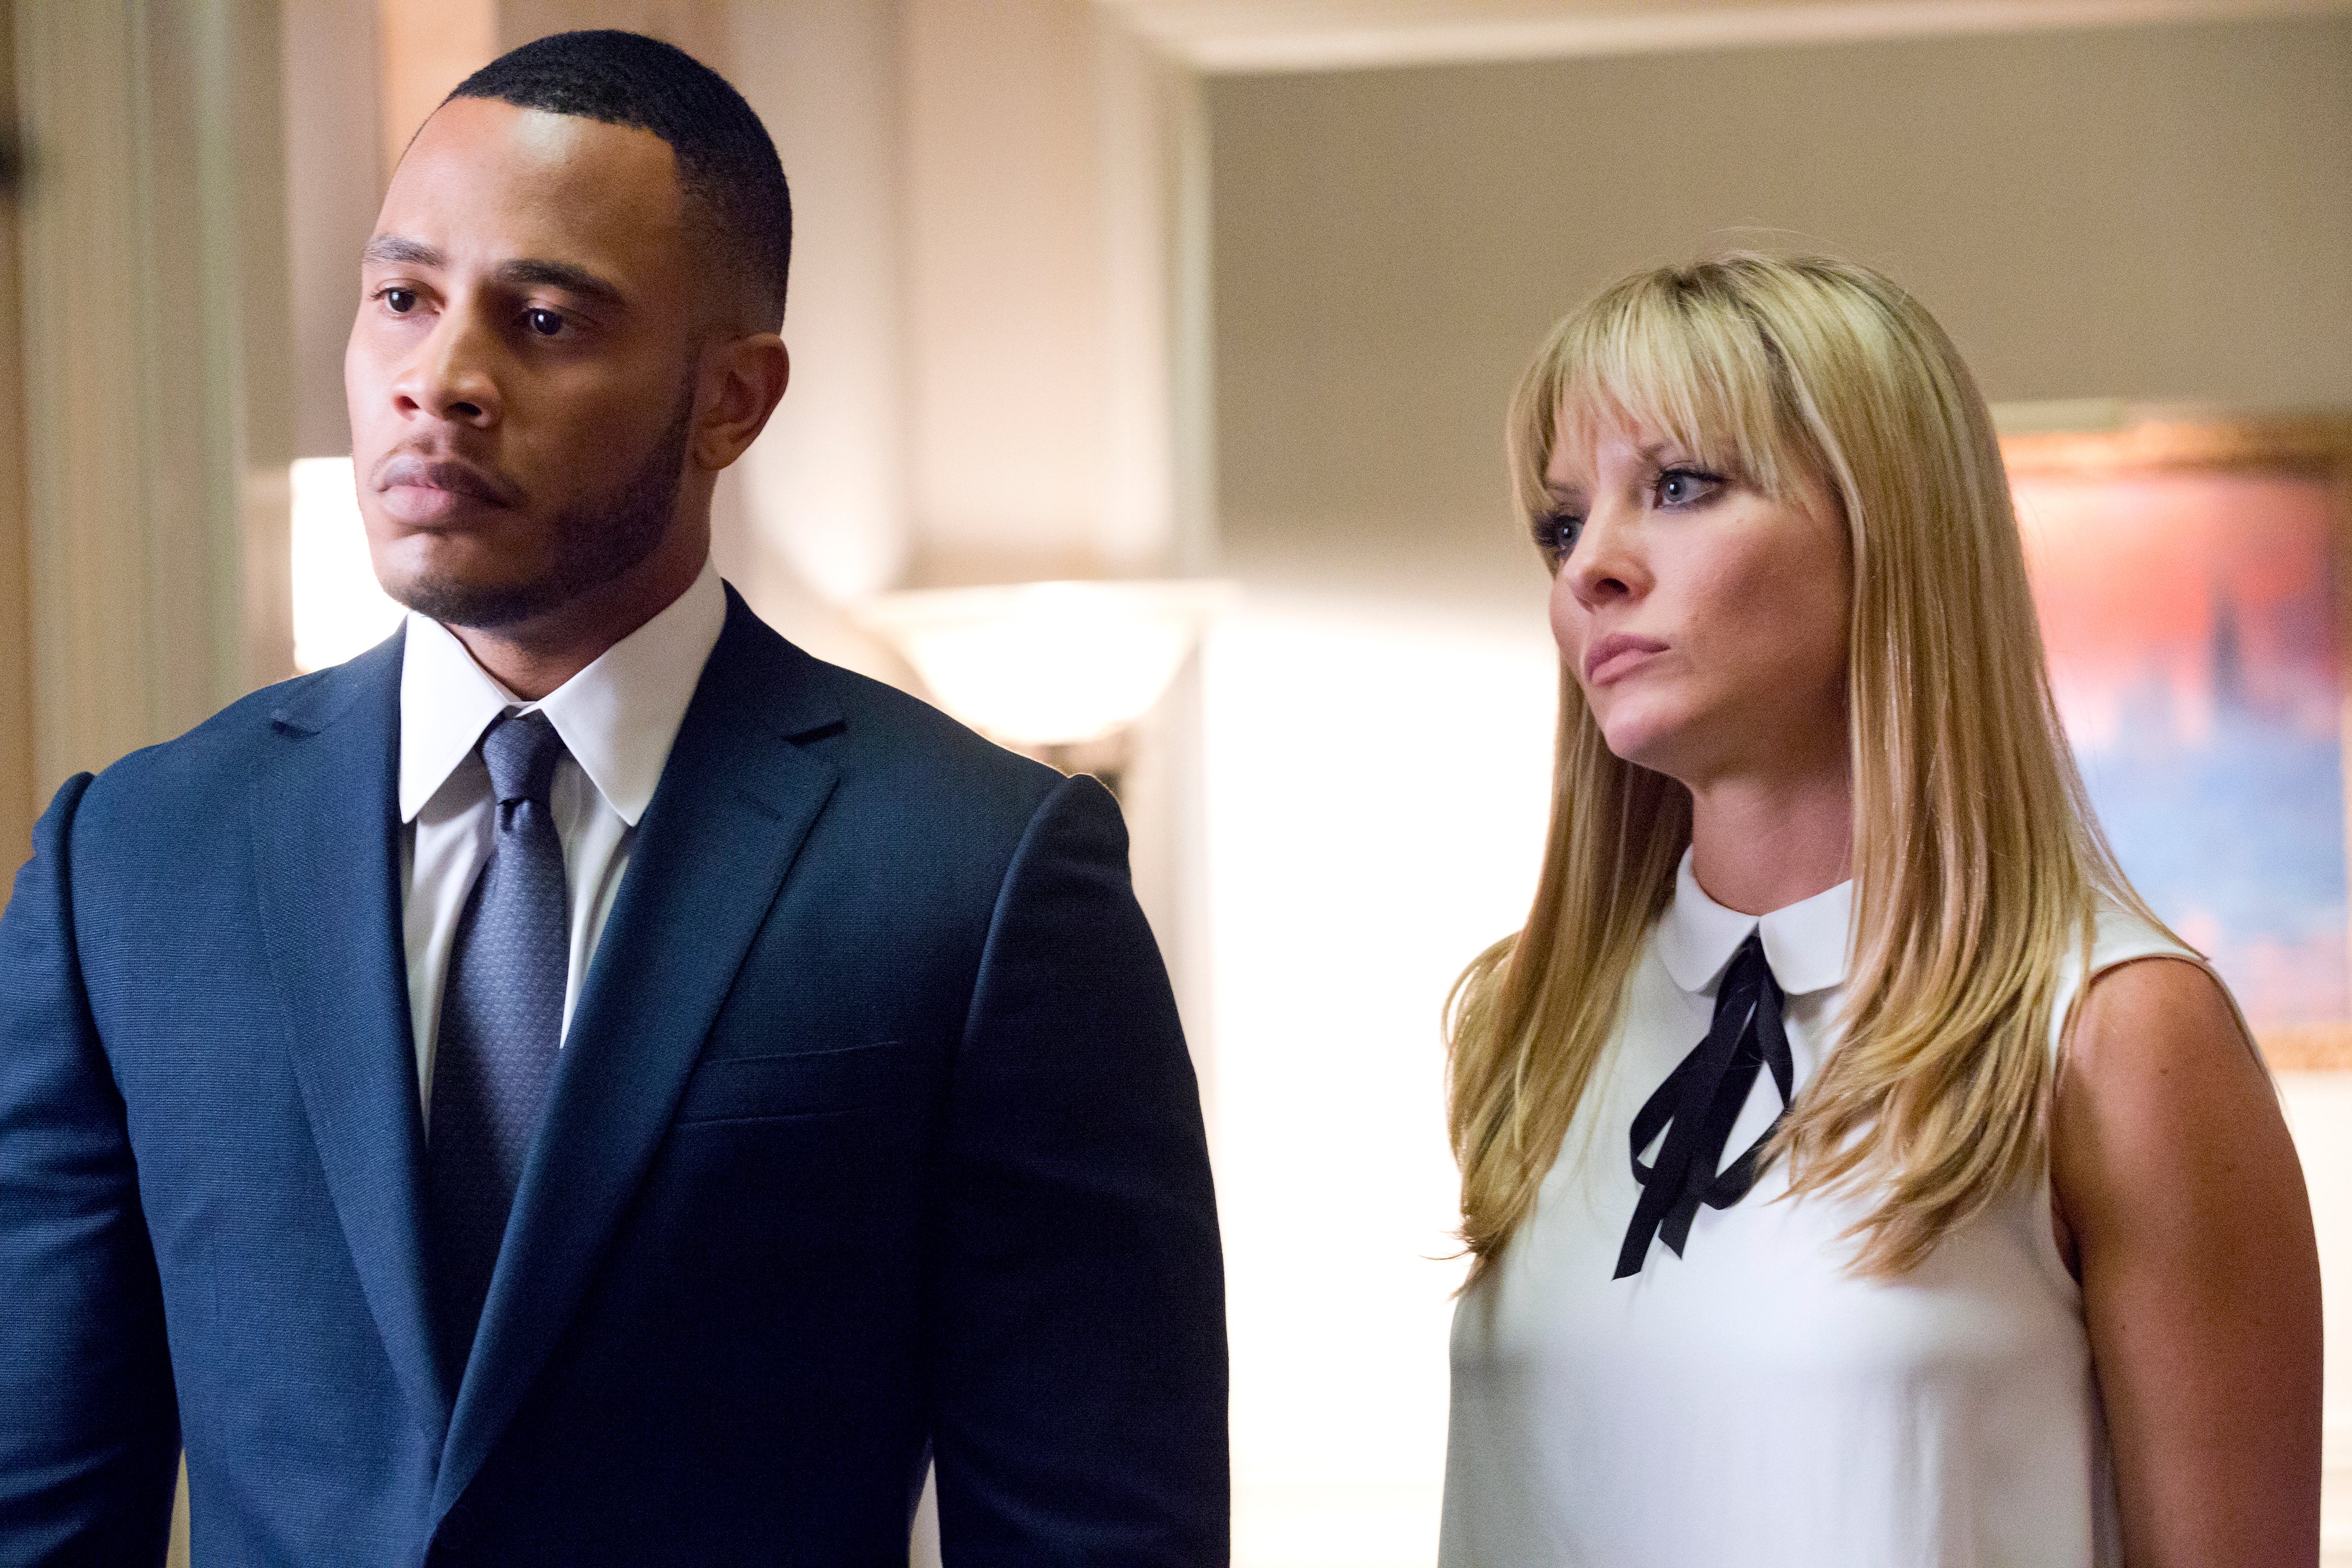 Get Your "Empire" Fix with a Sneak Peek of the Season 2 Premiere (You're Welcome!)
